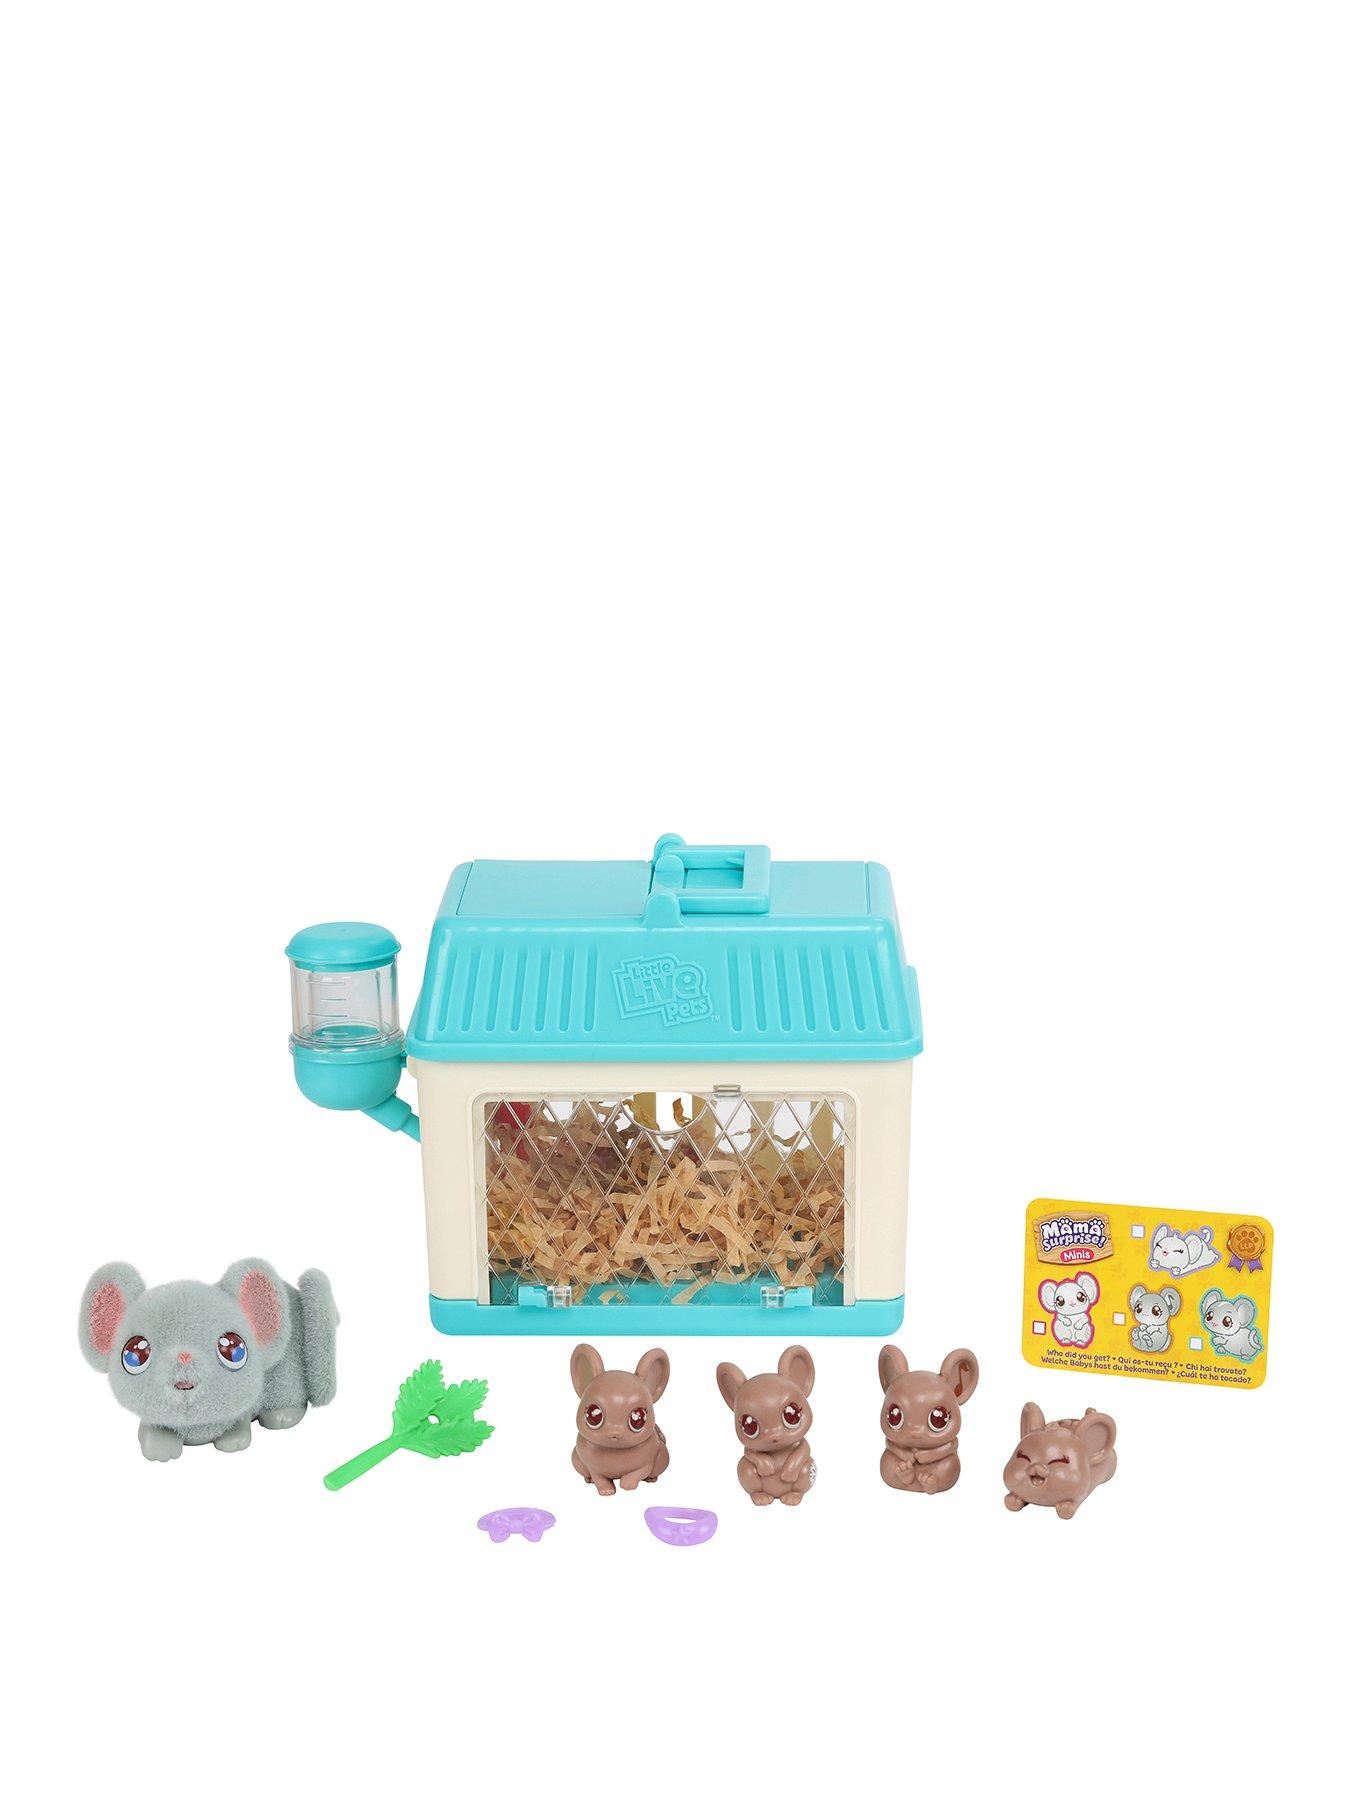 Little Live Pets - Mama Surprise Minis. Feed and Nurture a Lil' Mouse. She  has 2, 3, or 4 Babies with Surprise Accessories to Dress Up The Babies for